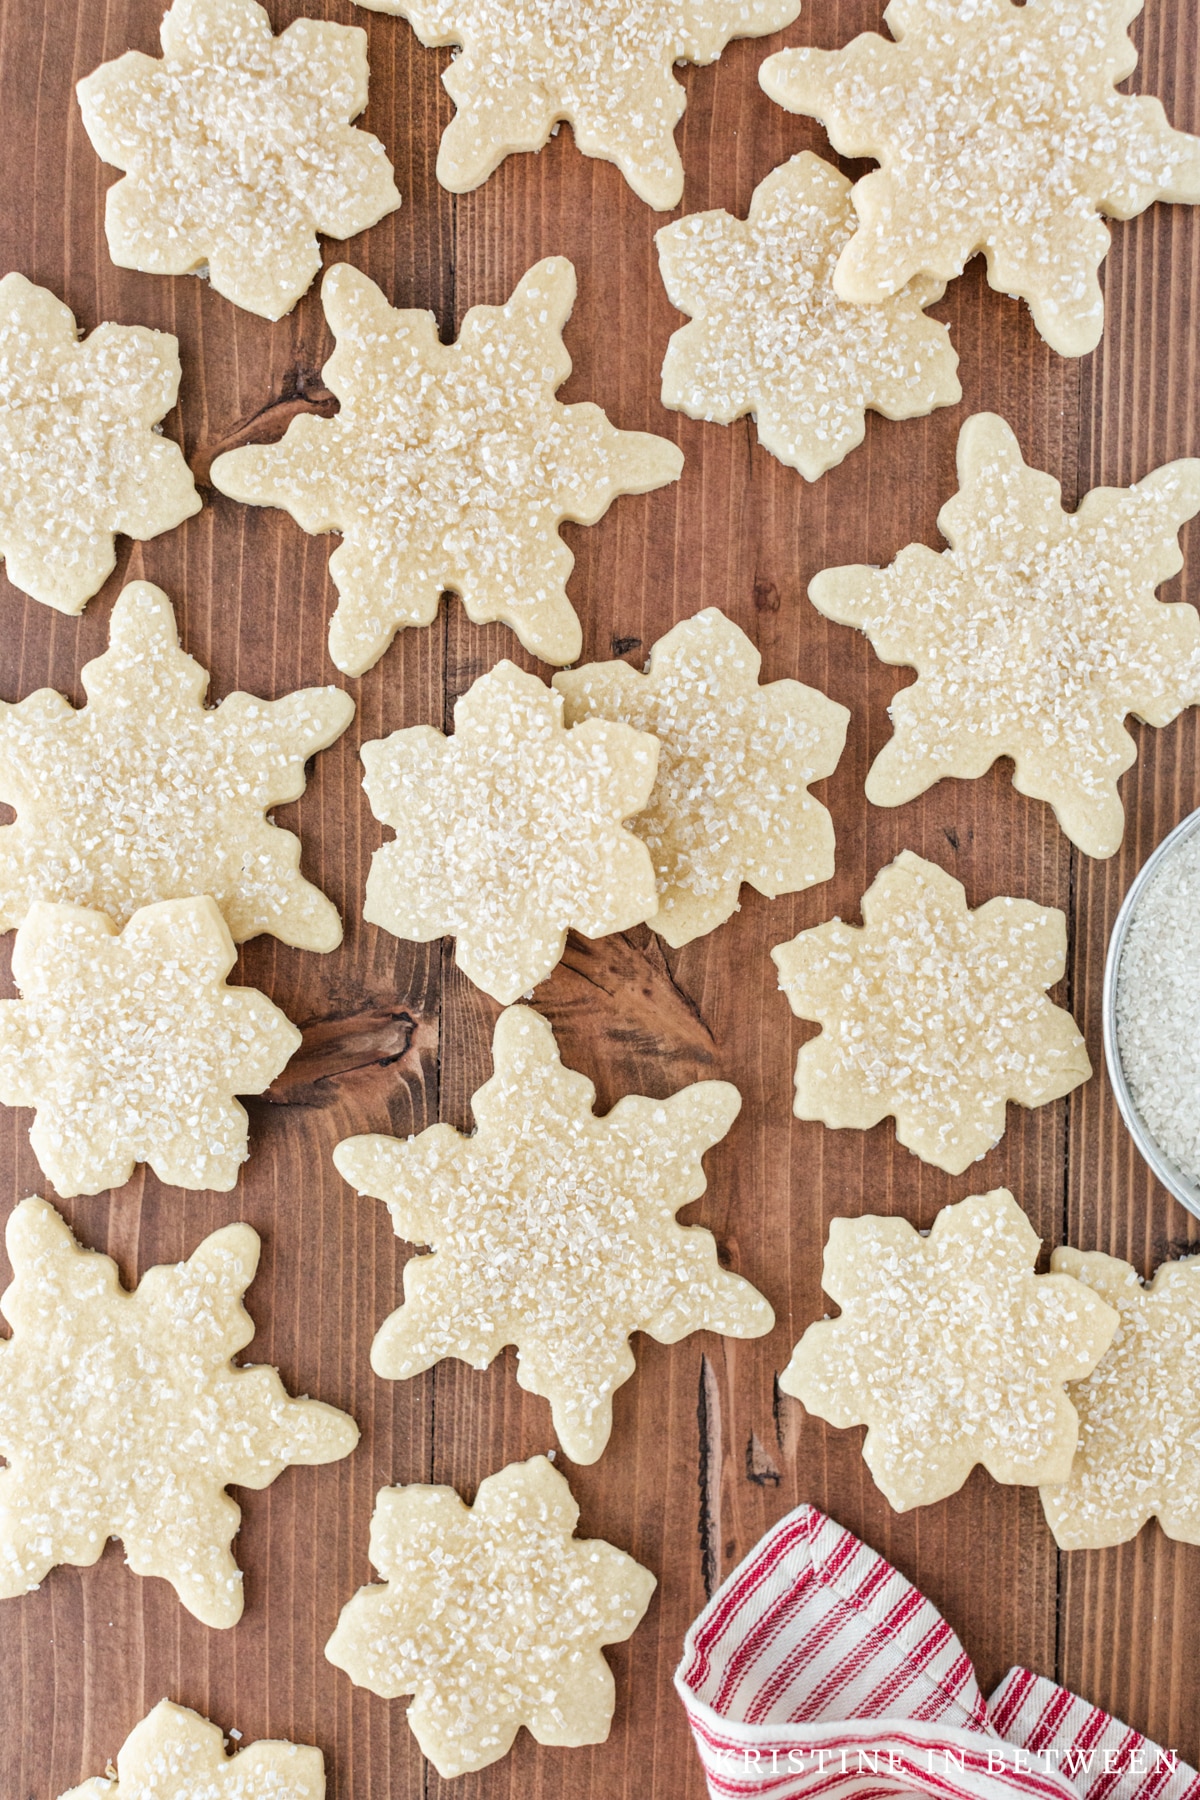 Cut out sugar cookies laying on a wooden table with a small bowl of sugar.